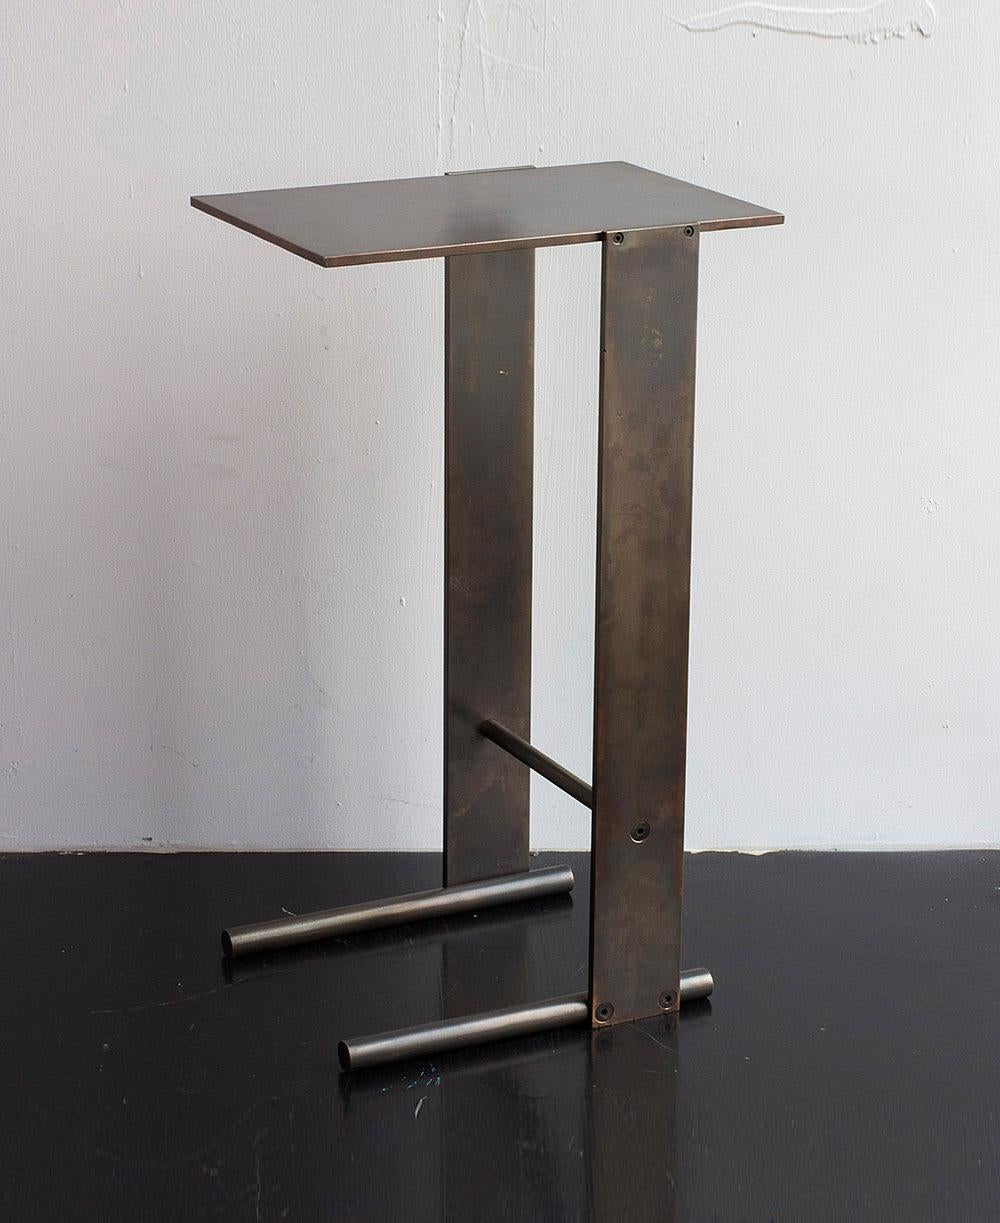 Untitled Side Table Polished Unlacquered Brass Small Accent, End or Drink Stand In New Condition For Sale In Ozone Park, NY